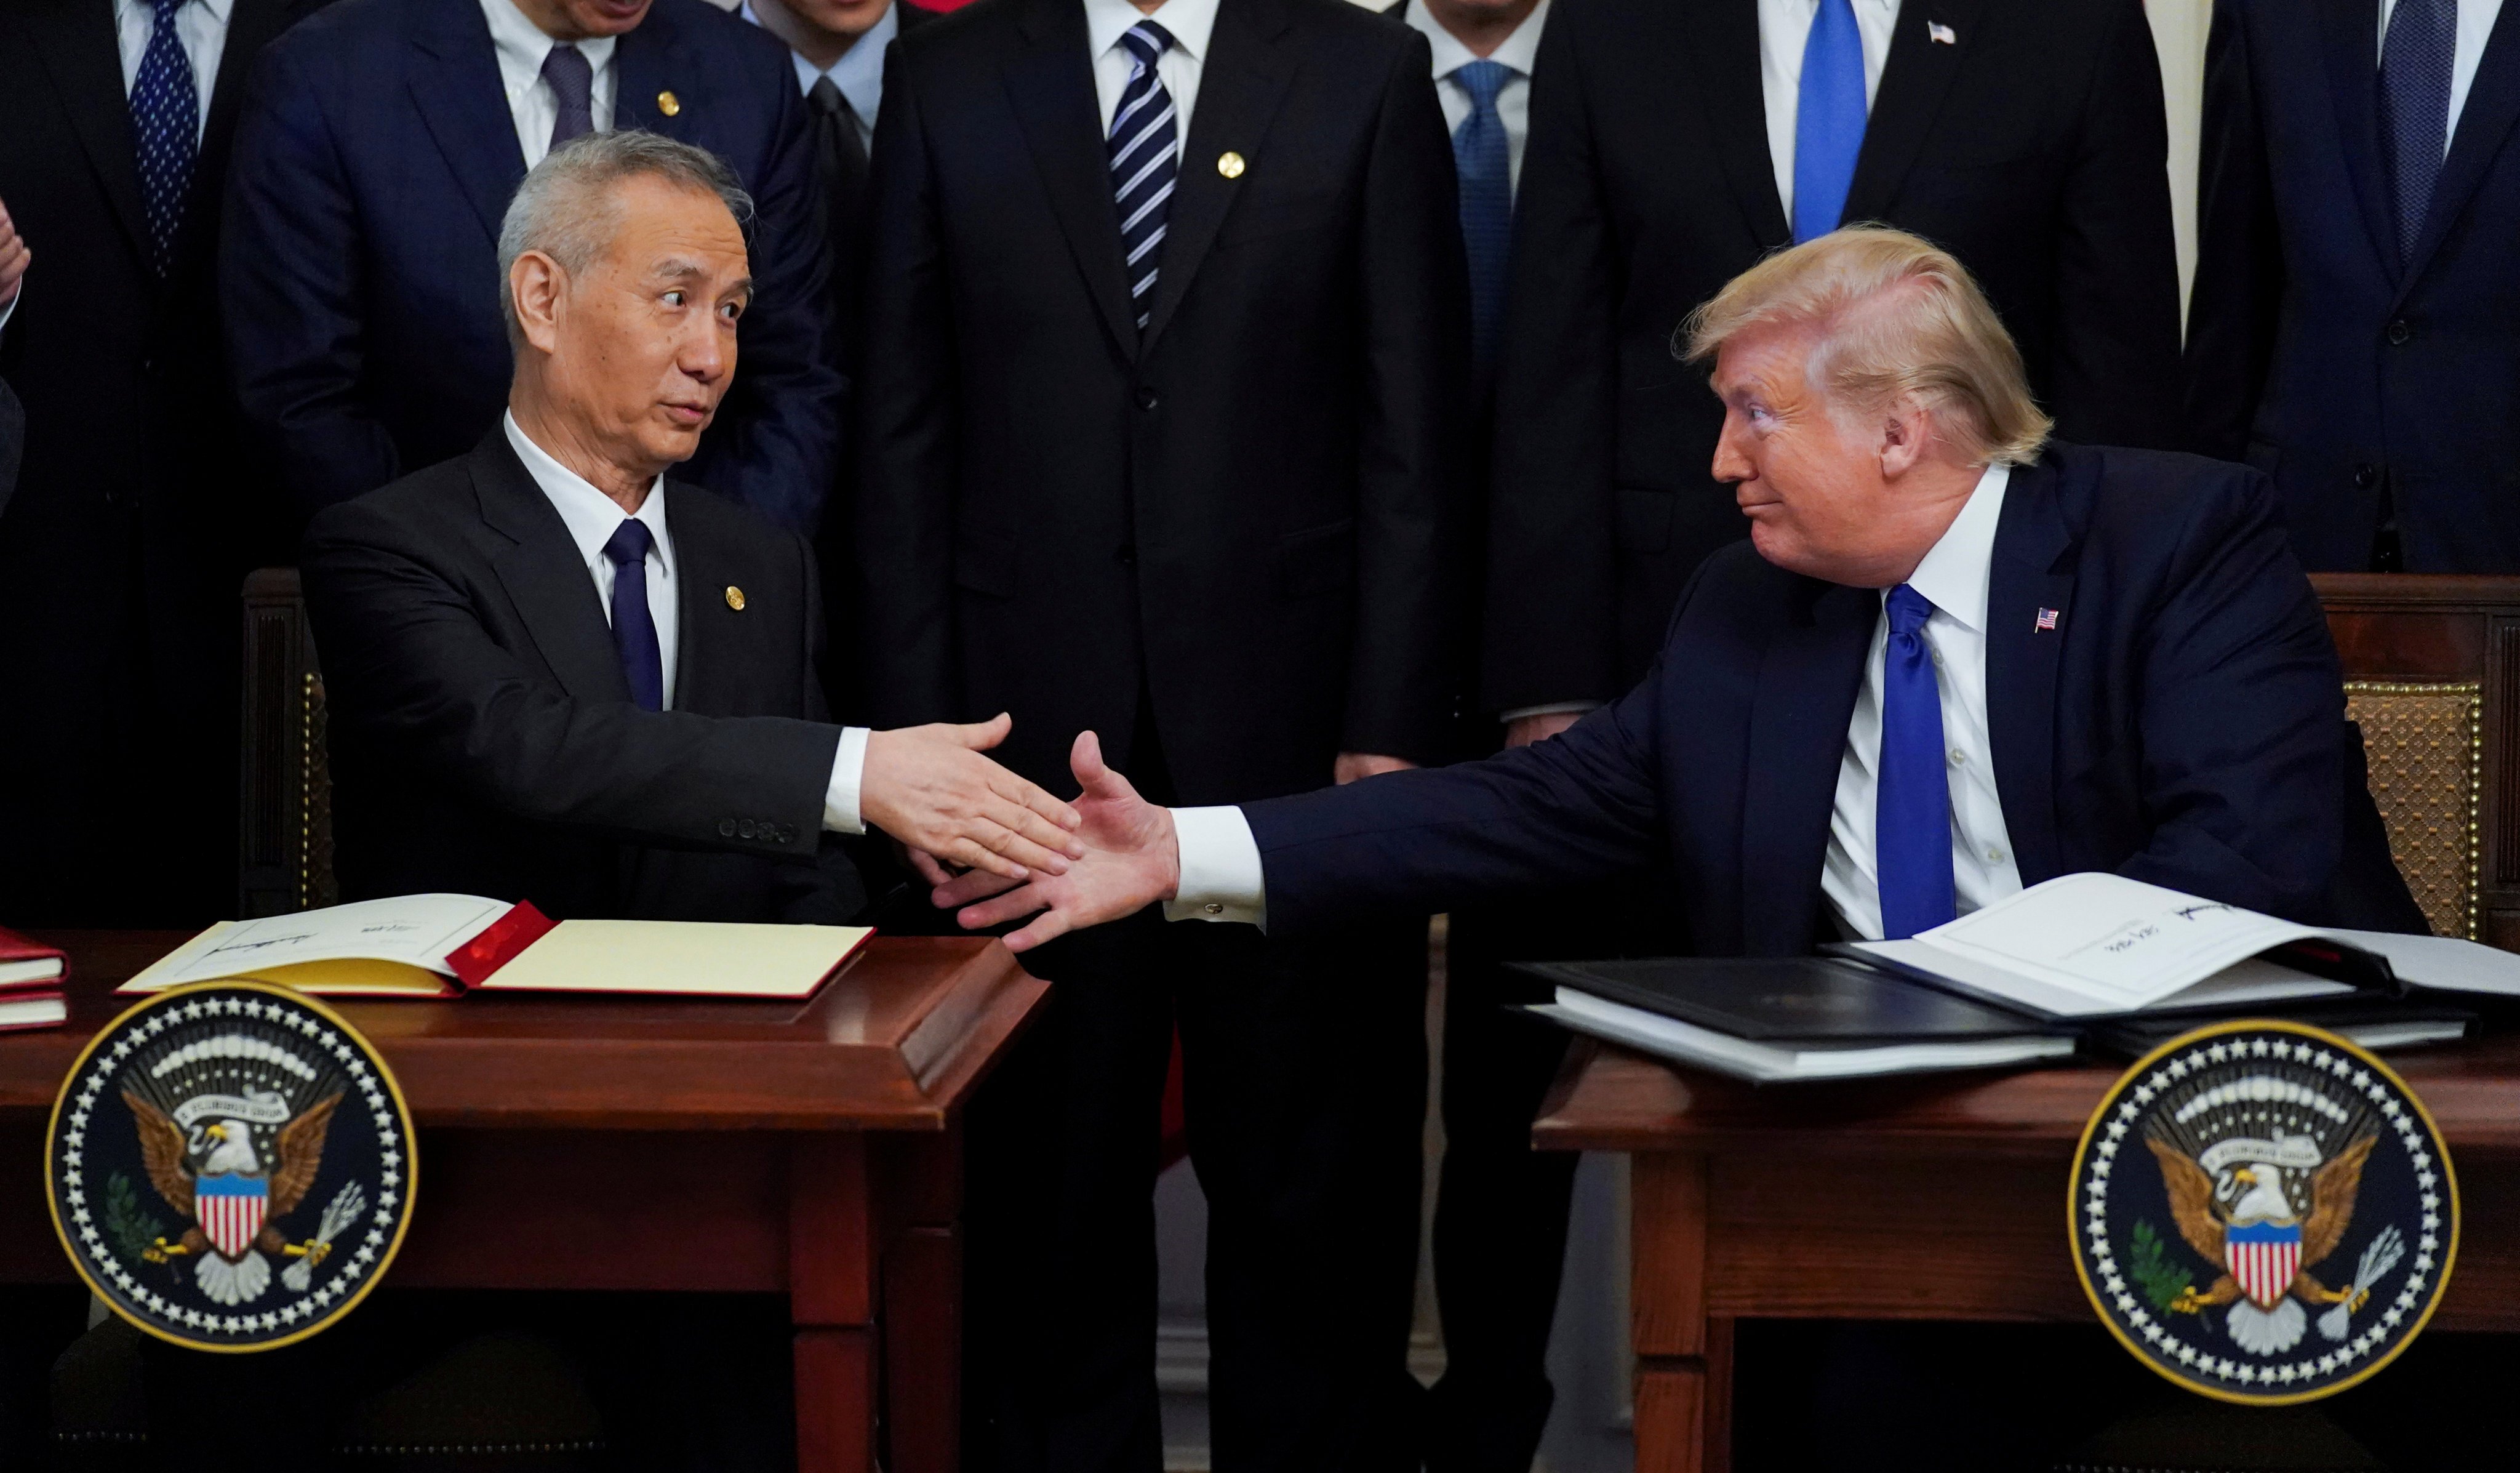 Vice-Premier Liu He (left) and then US president Donald Trump shake hands after signing phase one of the US-China trade agreement during a ceremony in the East Room of the White House in Washington on January 15, 2020. Photo: Reuters